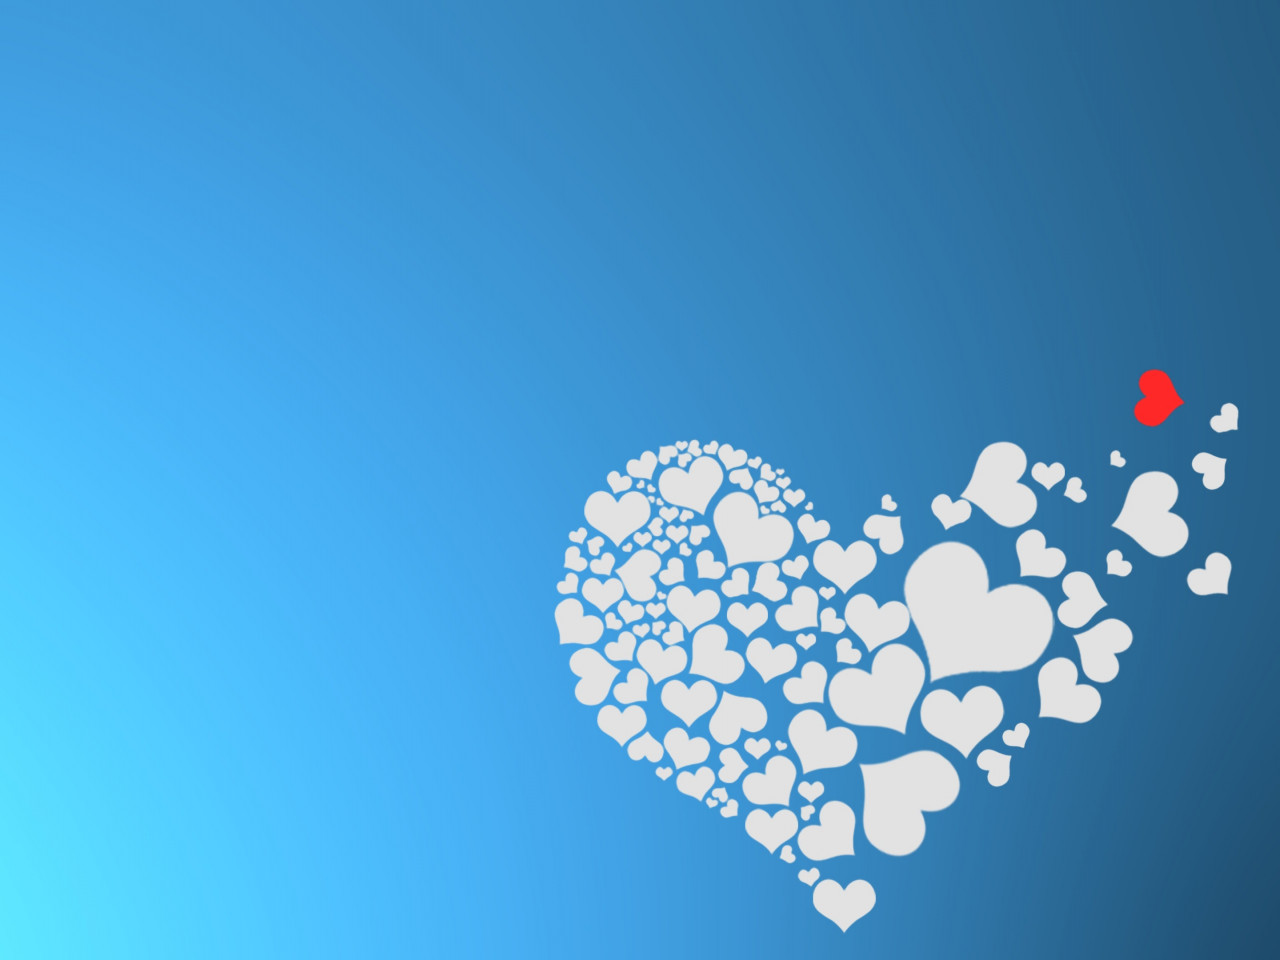 The hearts of love wallpaper 1280x960